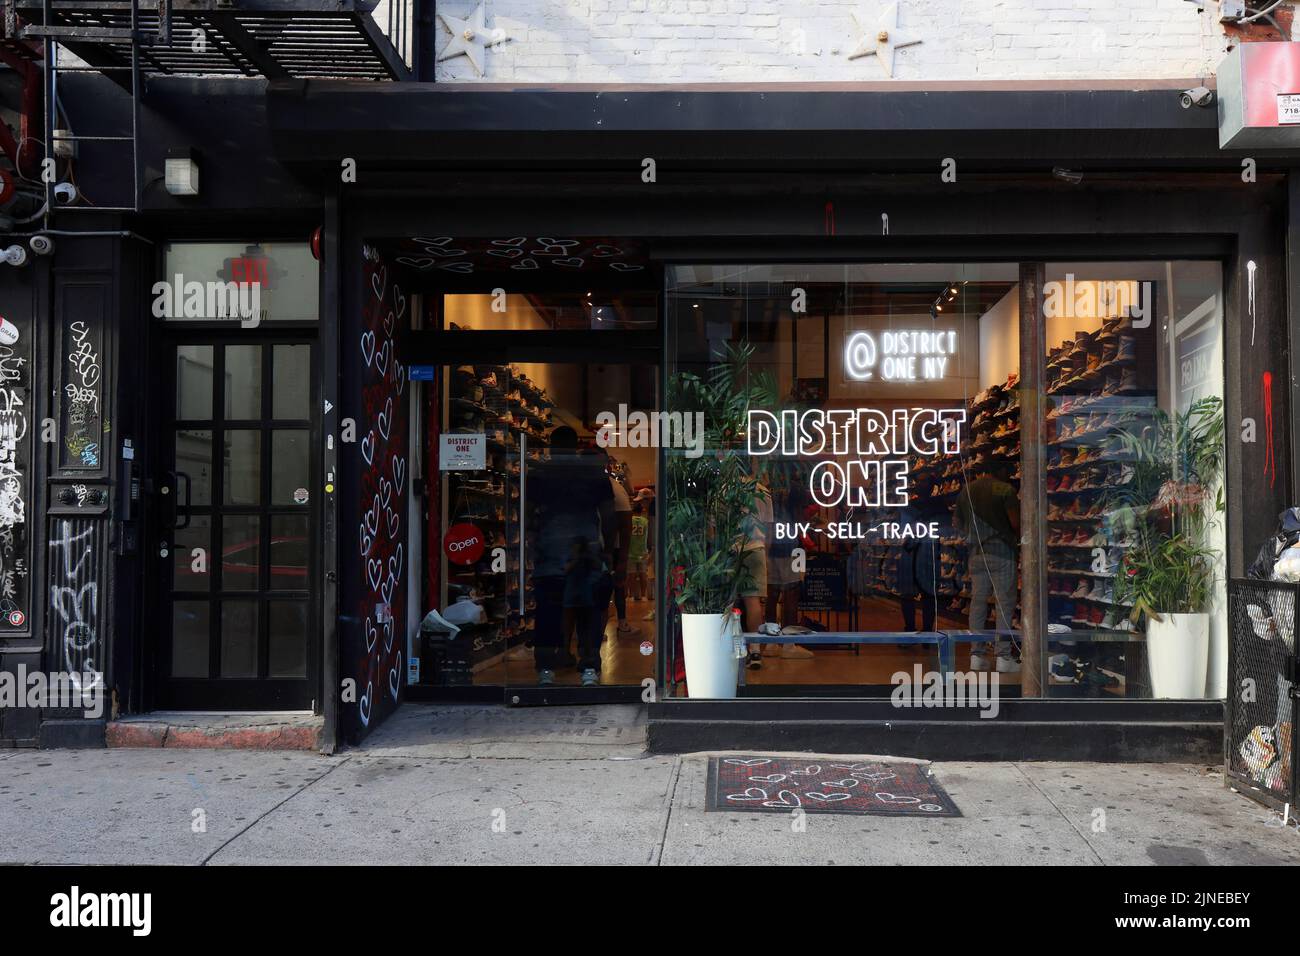 District One, 114 Stanton St, New York, NYC storefront photo of a sneaker store in Manhattan's Lower East Side neighborhood. Stock Photo